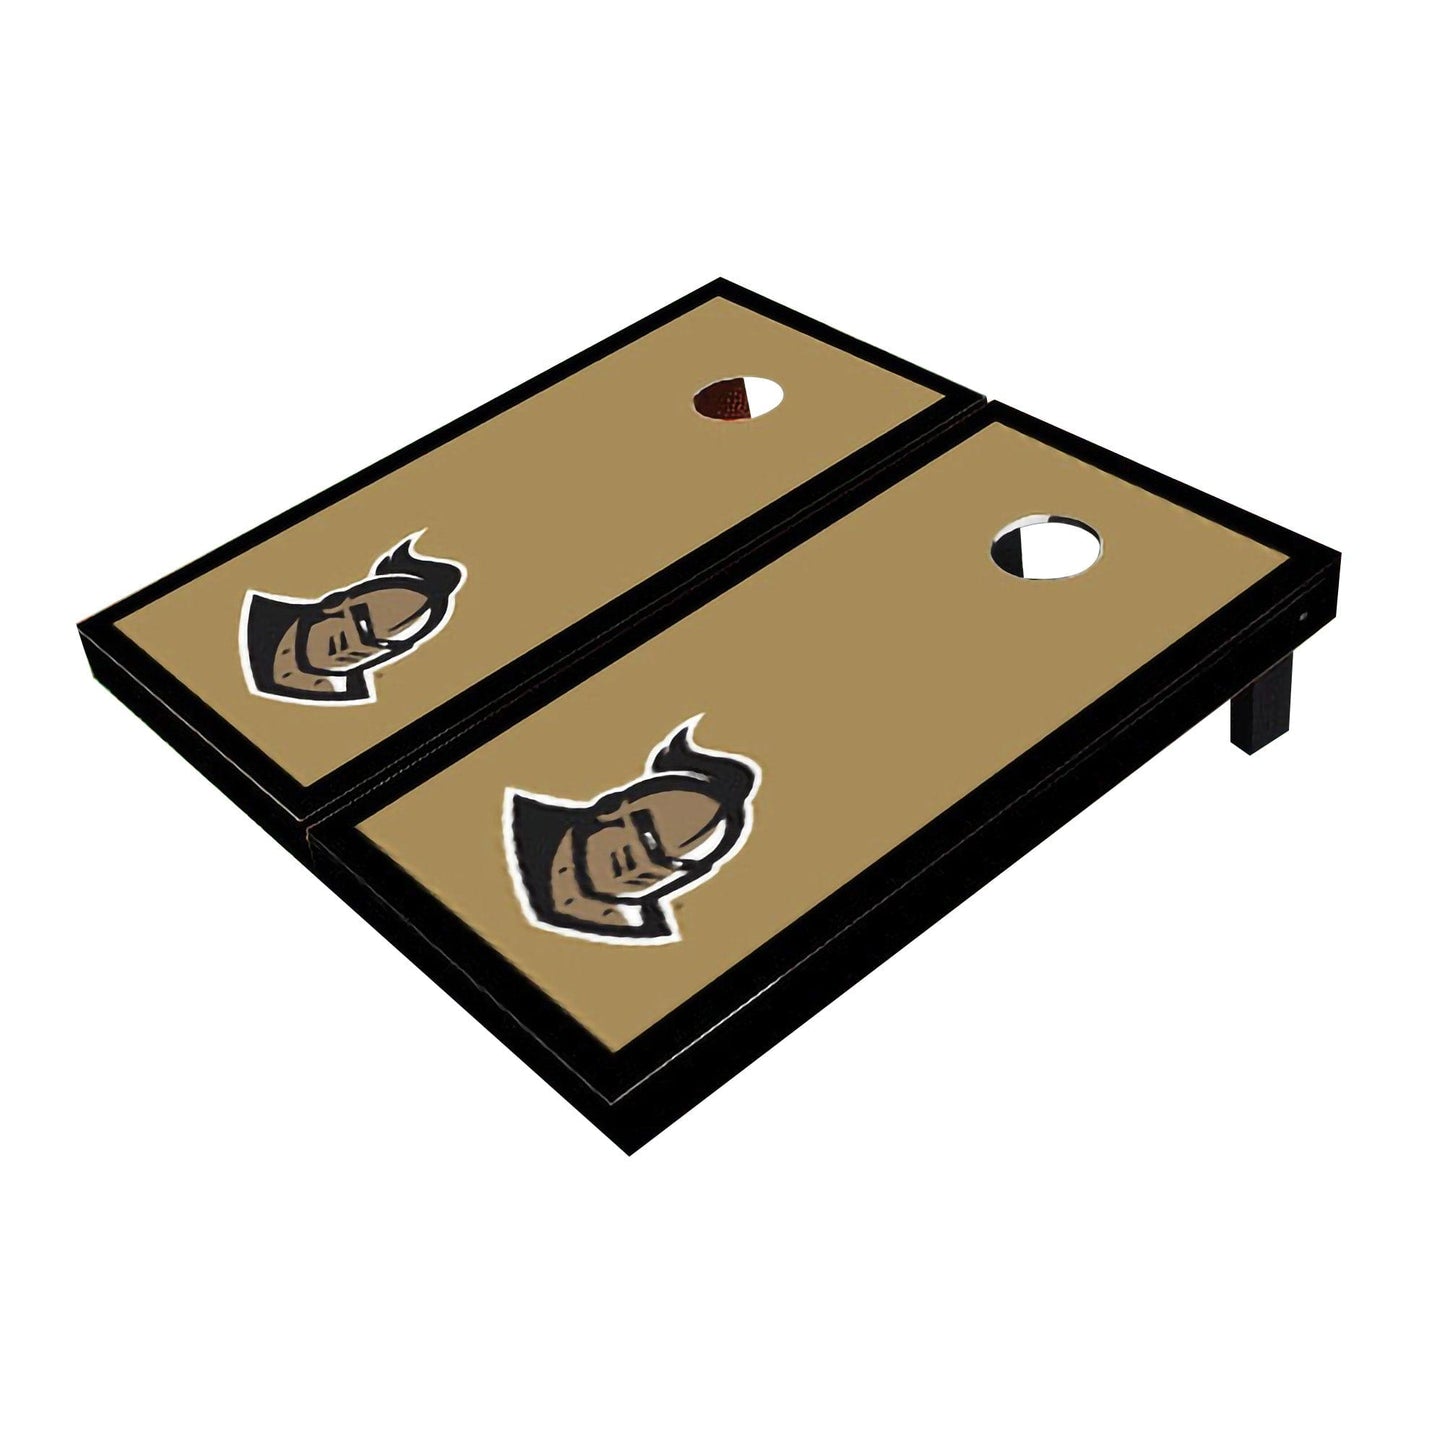 Central Florida UCF Golden Knights "Knightro" Gold And Black Matching Borders Cornhole Boards